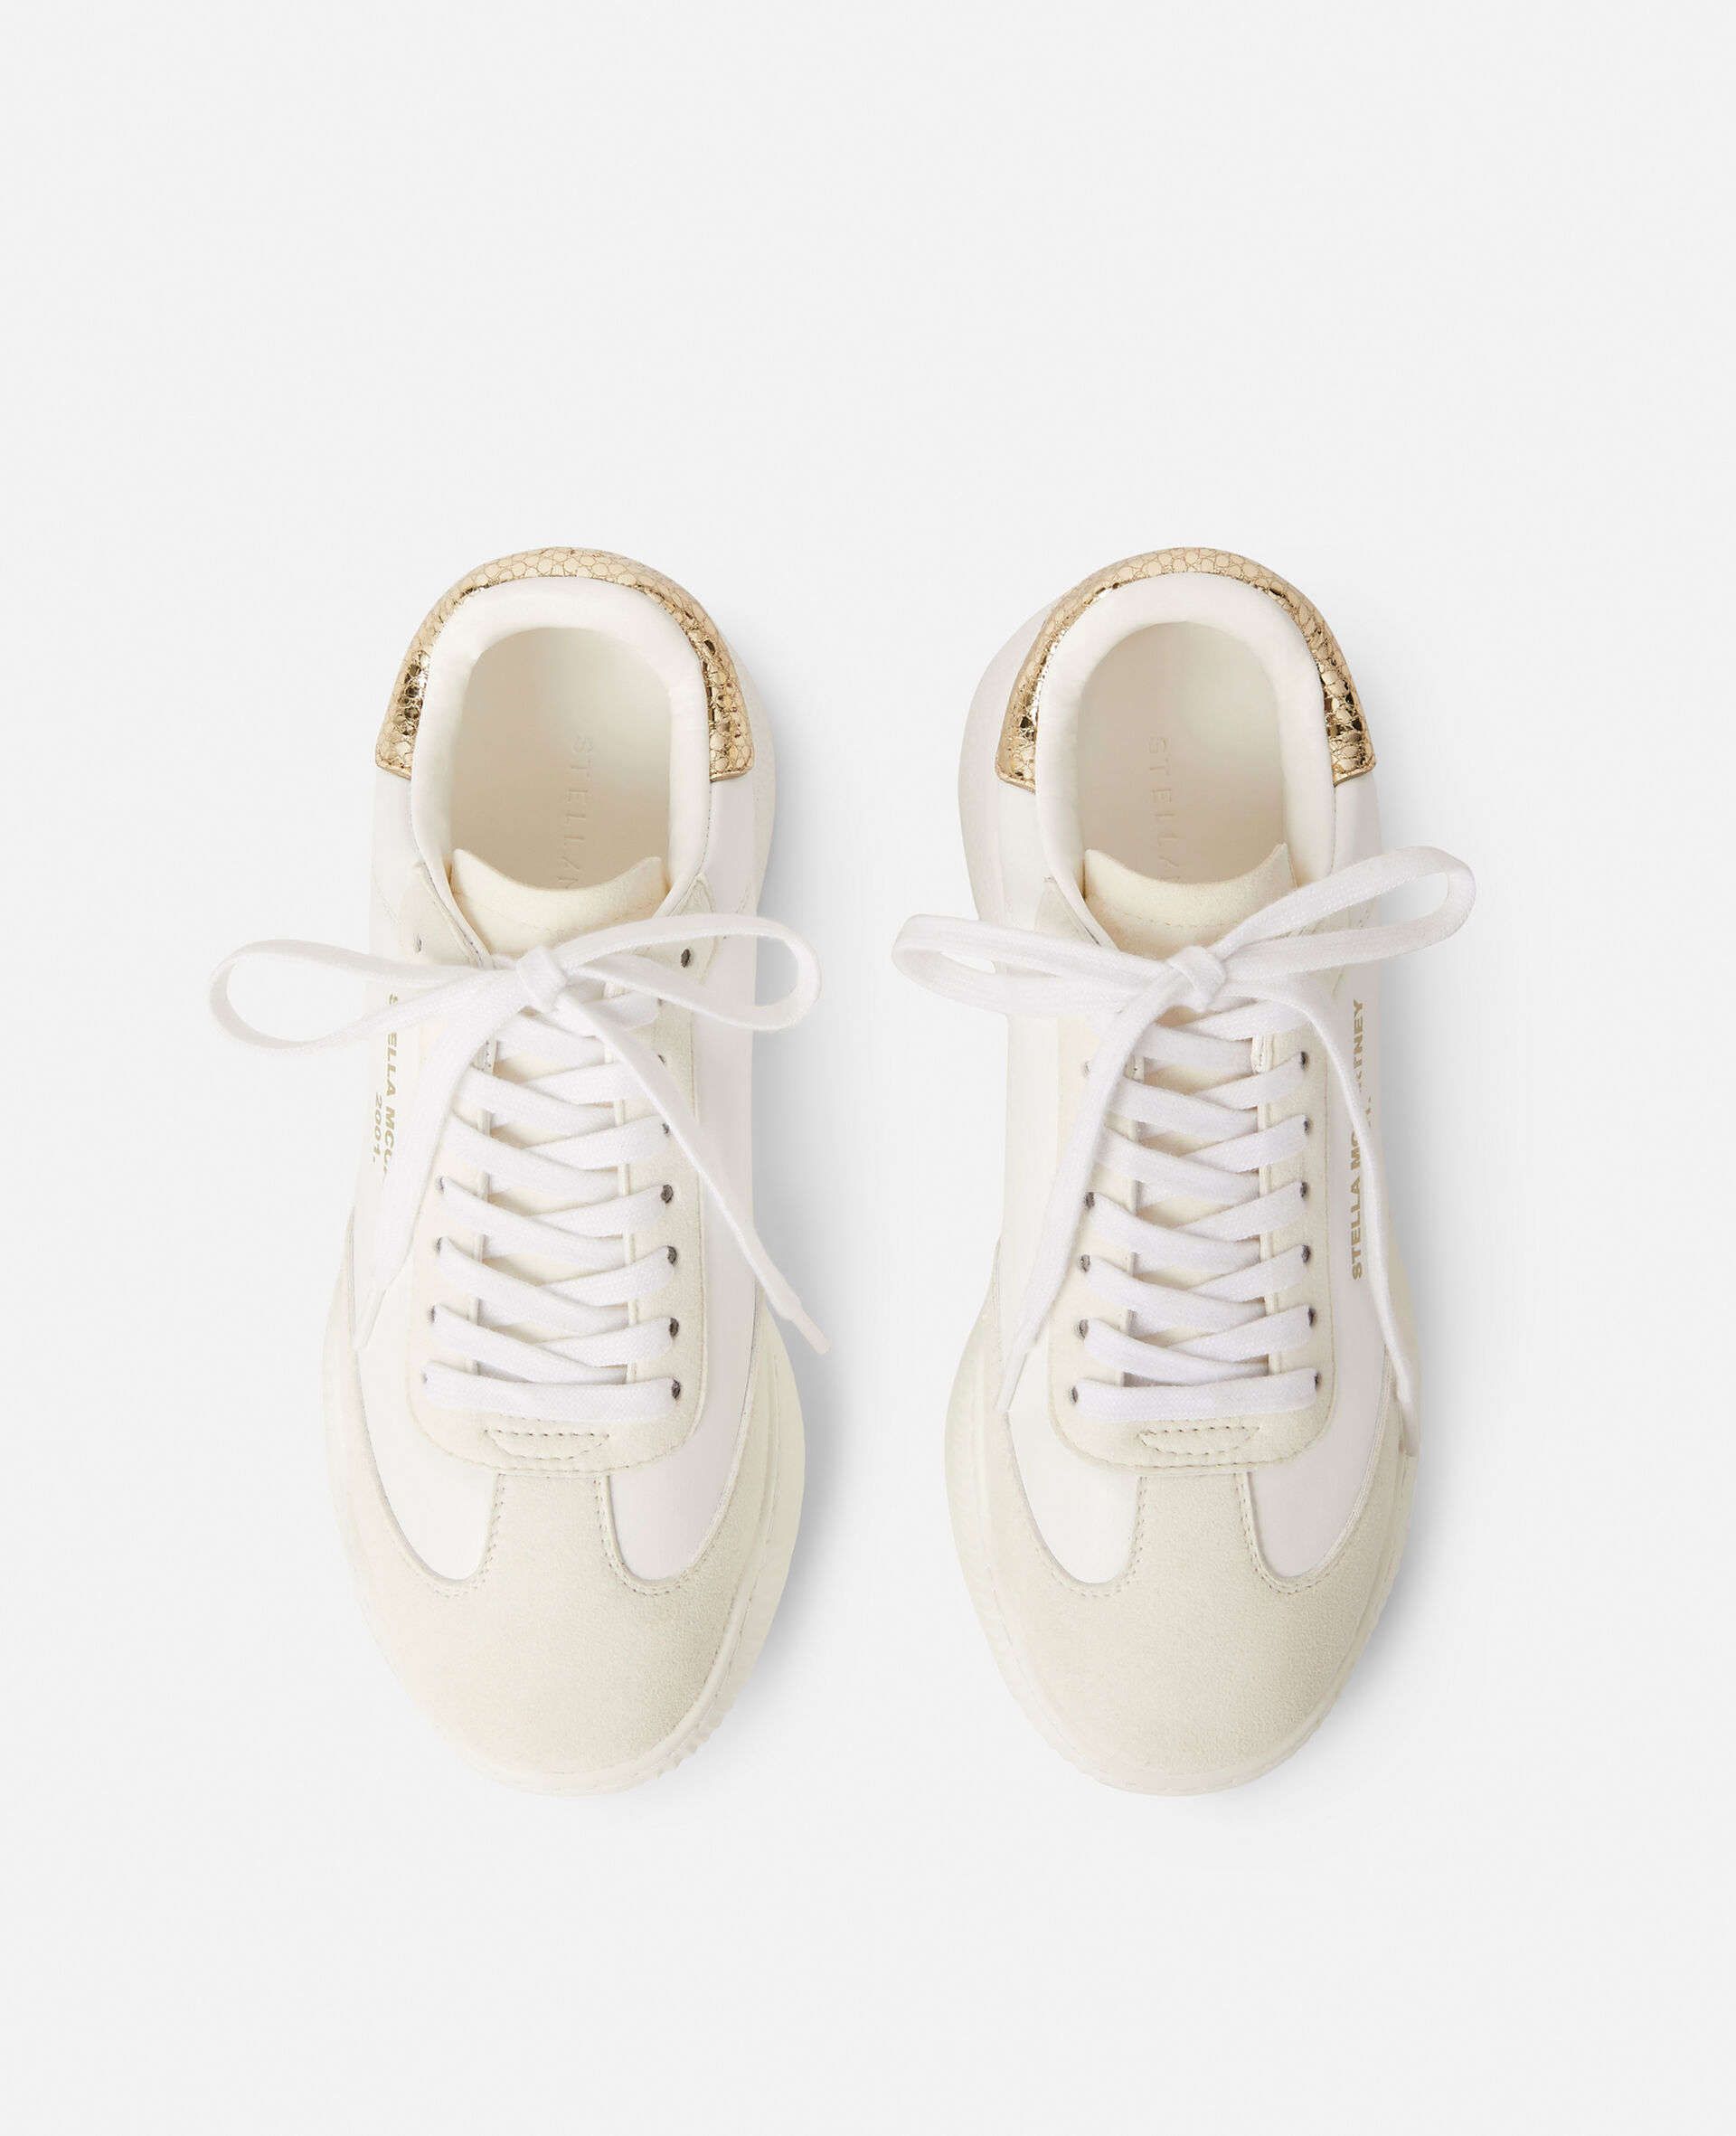 Loop Lace-up Sneakers-White-large image number 3